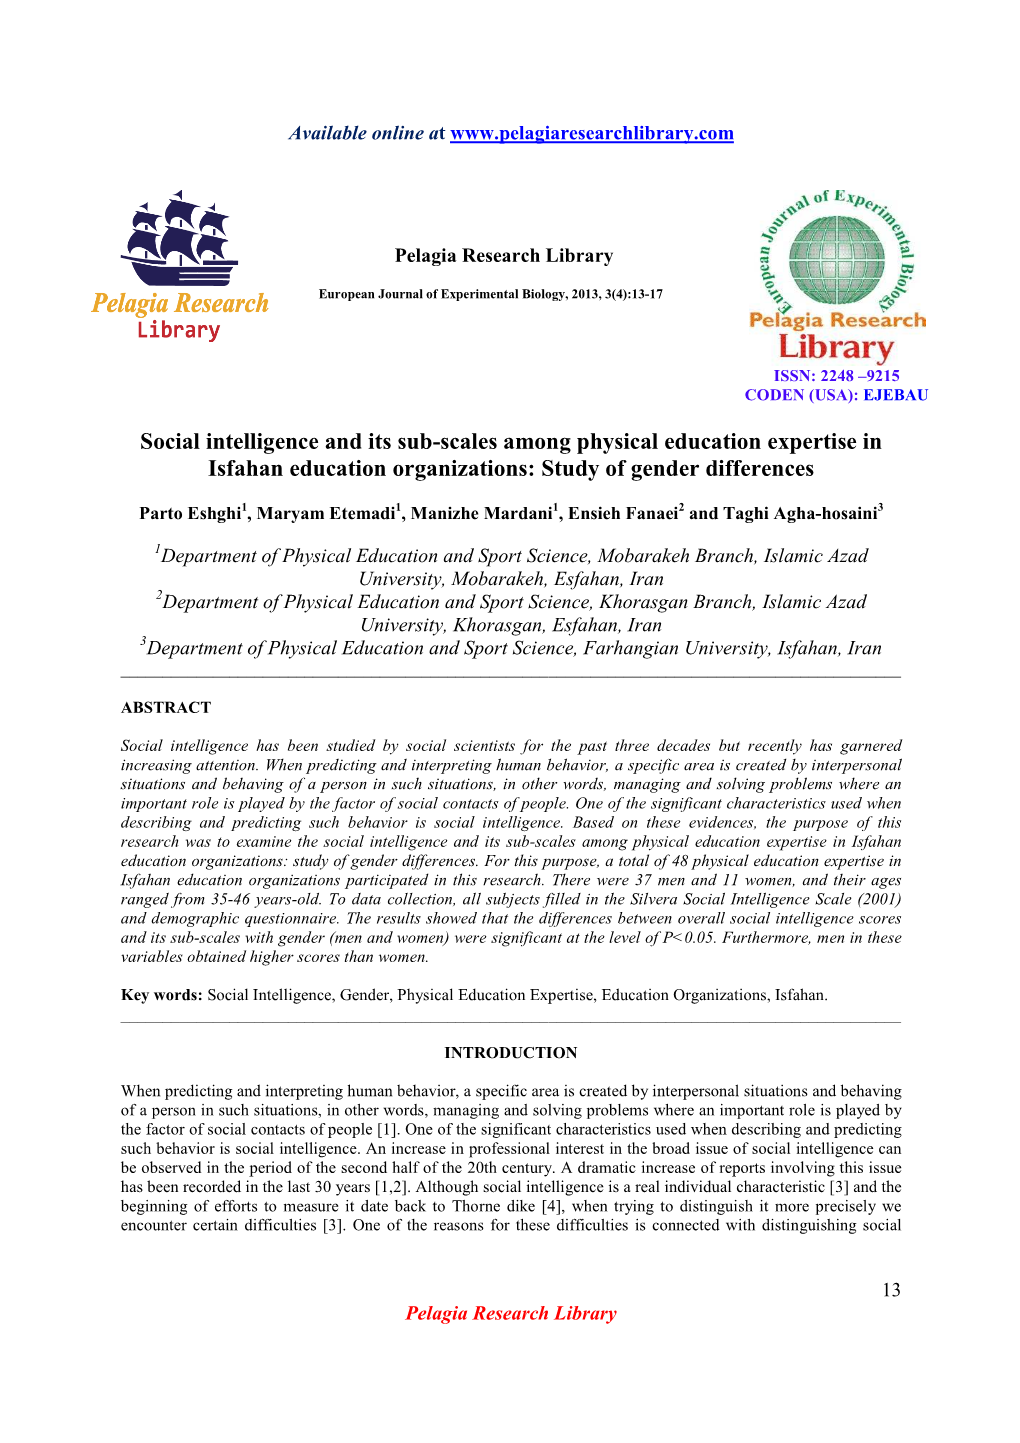 Social Intelligence and Its Sub-Scales Among Physical Education Expertise in Isfahan Education Organizations: Study of Gender Differences